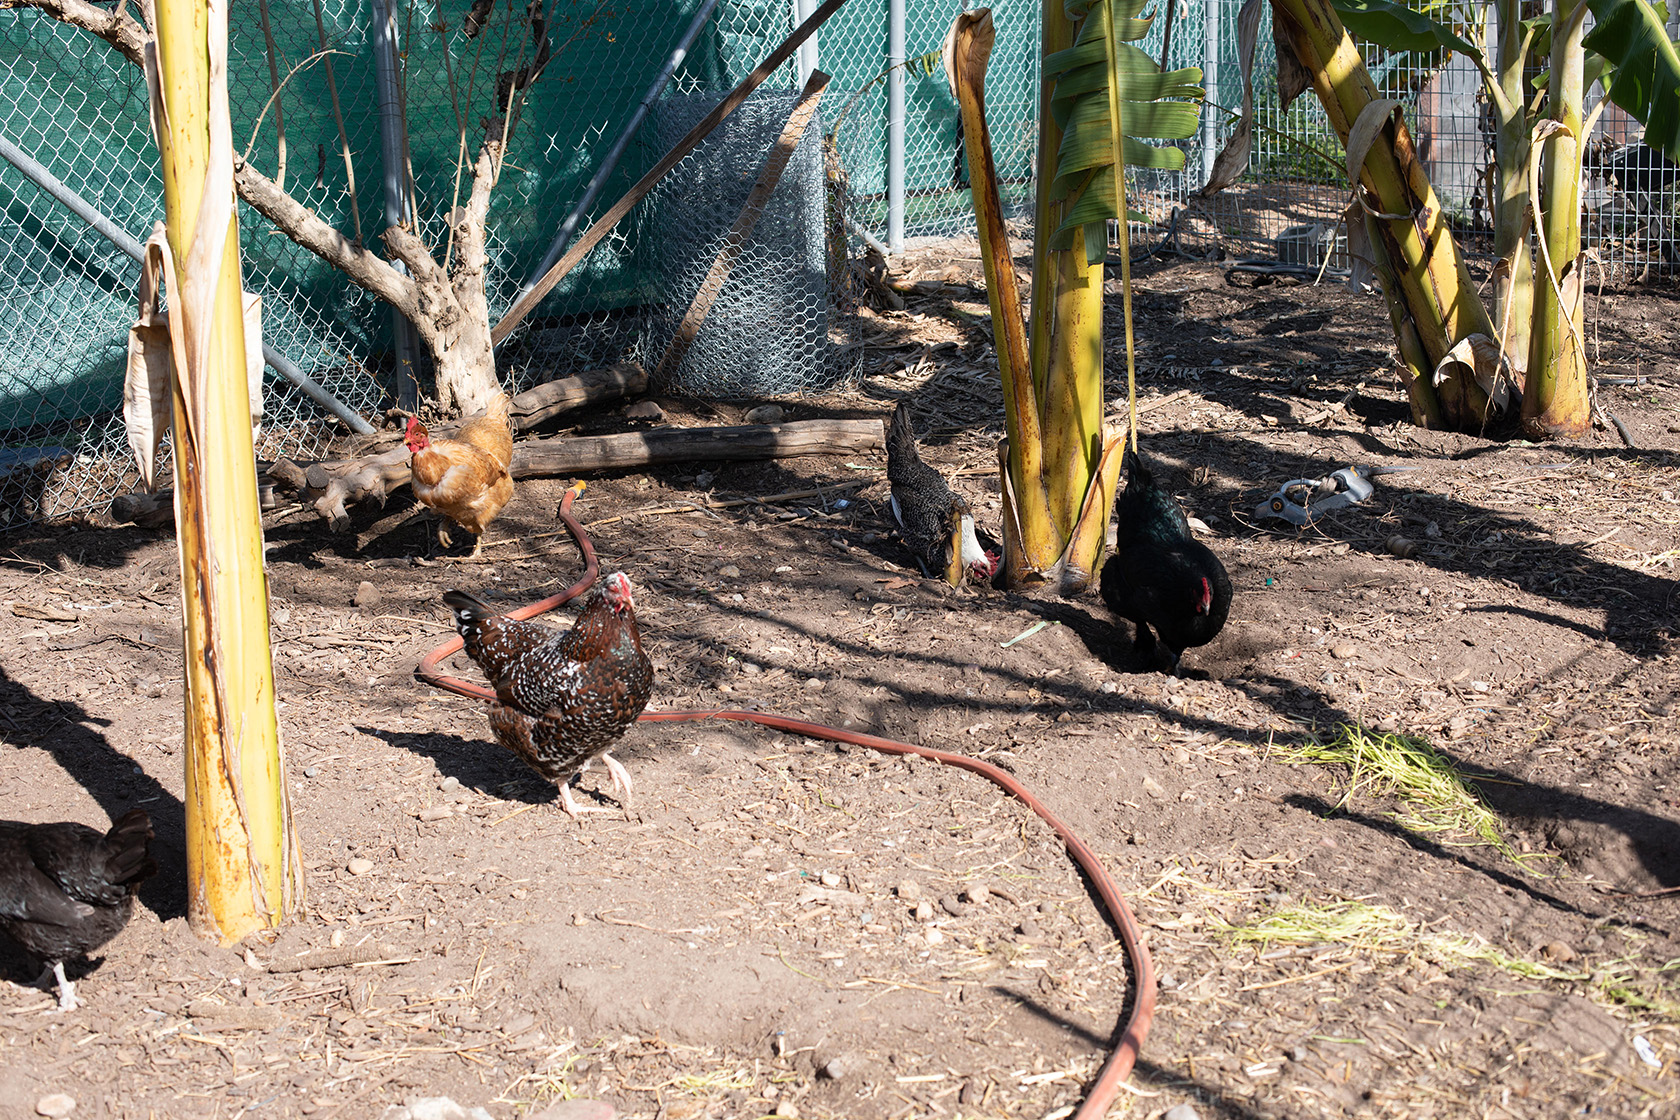 Chicken Coop at Farm + Food Lab in Irvine's Great Park (Photo by Julie Nguyen)